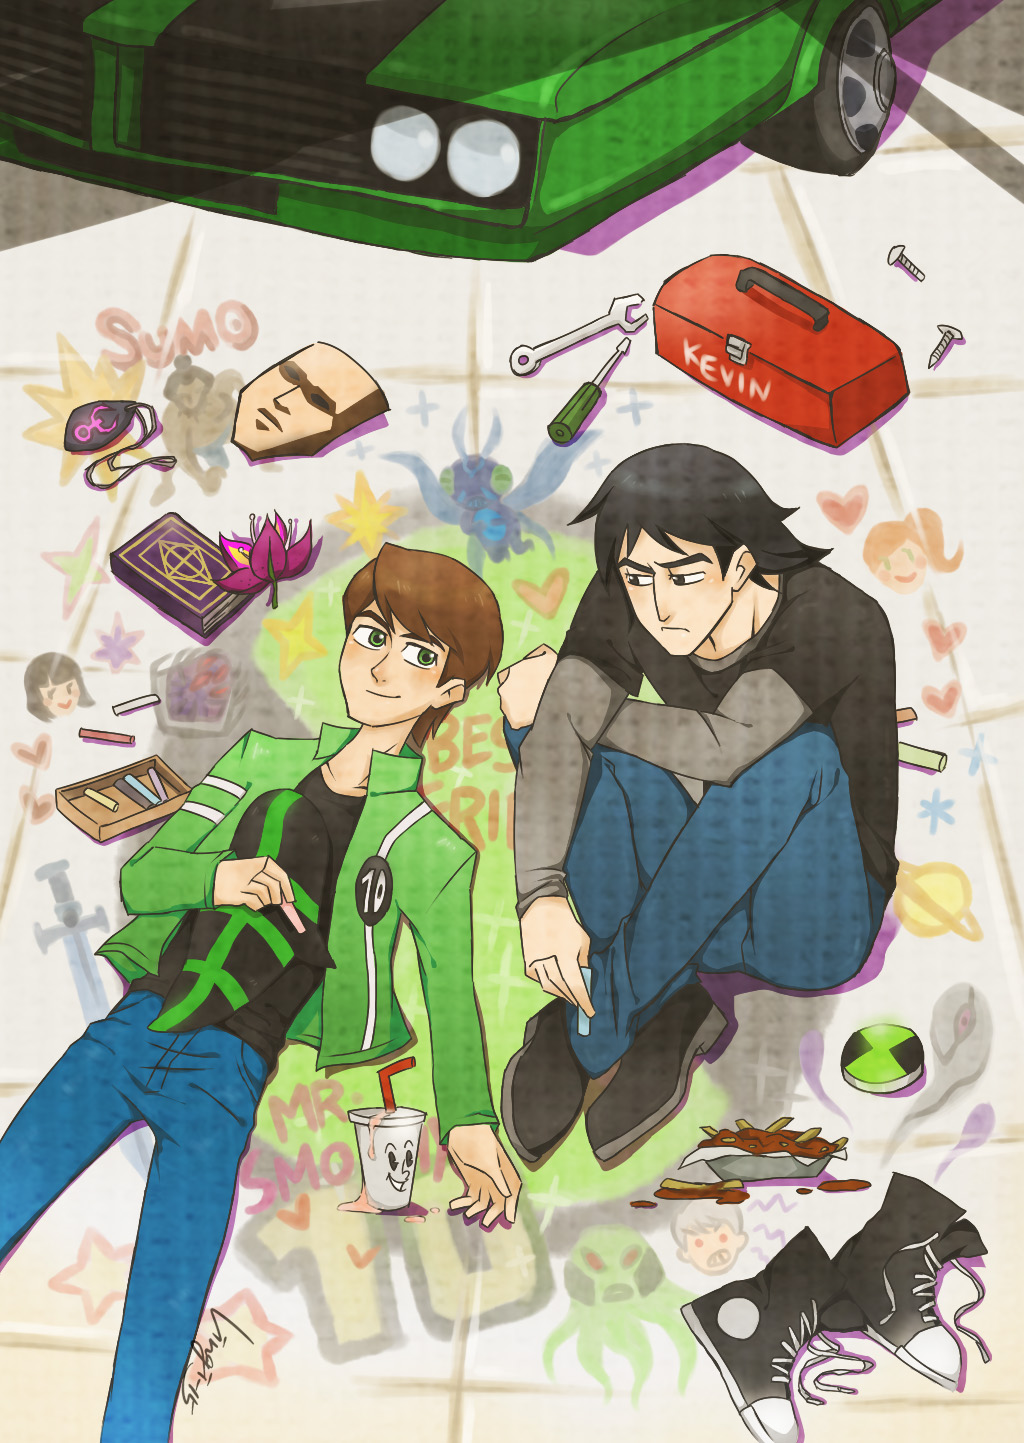 2boys albedo_(ben_10) ben_10 ben_10:_alien_force benjamin_kirby_tennyson big_chill black_eyes black_hair bob_cut book brown_hair car chalk chili chili_fries food french_fries green_eyes green_jacket grimoire gwendolyn_tennyson heart highres jacket julie_yamamoto kevin_ethan_levin lingi-15 looking_at_another male_focus mask motor_vehicle multiple_boys omnitrix screwdriver short_hair sitting smile smoothie sumo vehicle vilgax wrench